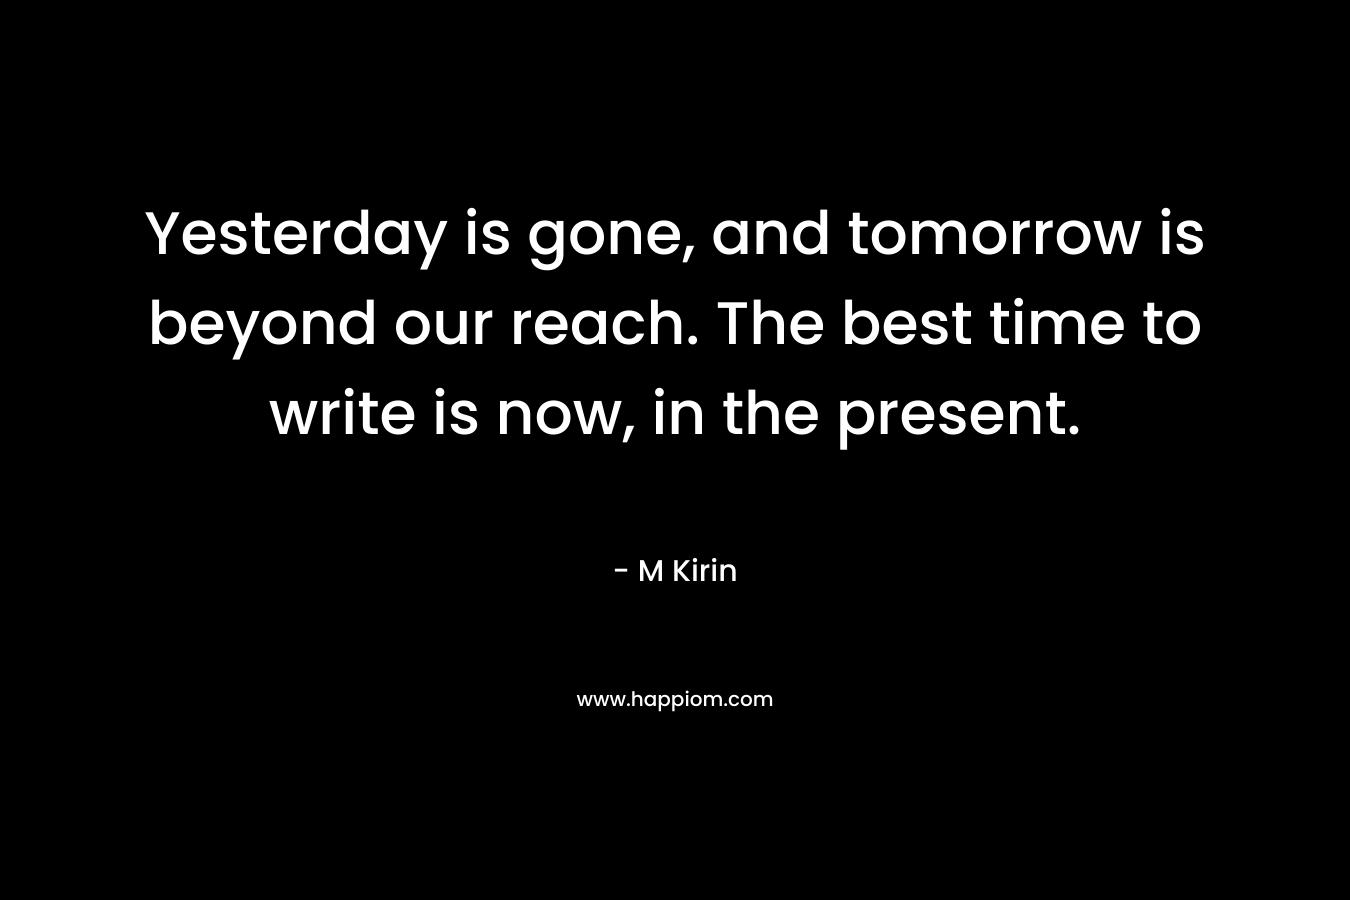 Yesterday is gone, and tomorrow is beyond our reach. The best time to write is now, in the present.